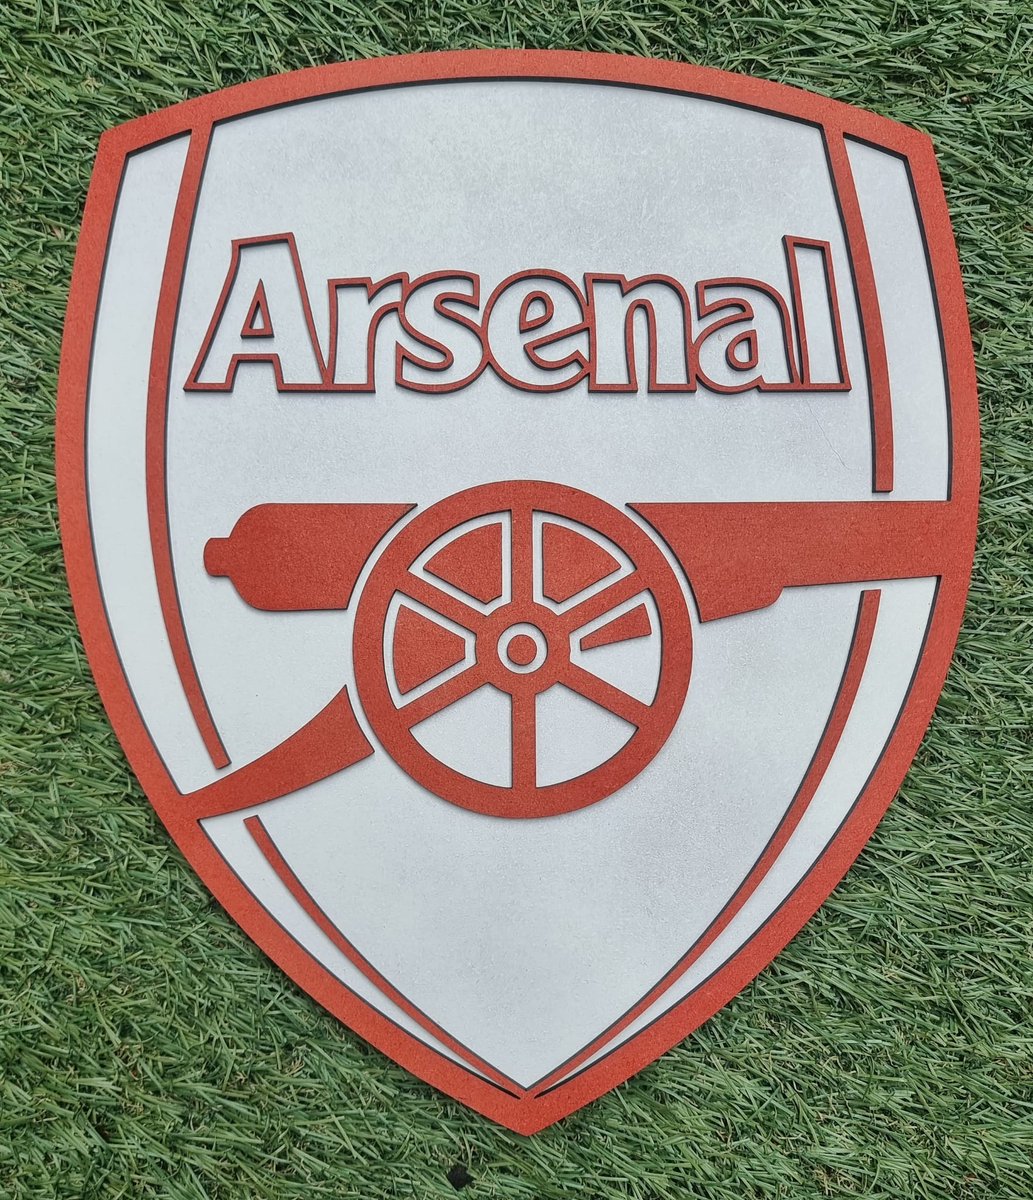 🚨 BEST EVER COMPETITION 🚨 
⚠️ 🚨 FINAL COMPETITION 🚨 ⚠️ 
WIN A BADGE OF YOUR CHOICE WHEN WE BEAT EVERTON. IF WE WIN THE LEAGUE, YOU WILL WIN EVERY BADGE WE MAKE. LIKE FOLLOW AND RETWEET TO ENTER.
MADJACKSIGNS.COM 
#Arsenal #Afc #GUNNERS #GOONERS #COYG #ARSEVE  #CLOCKEND